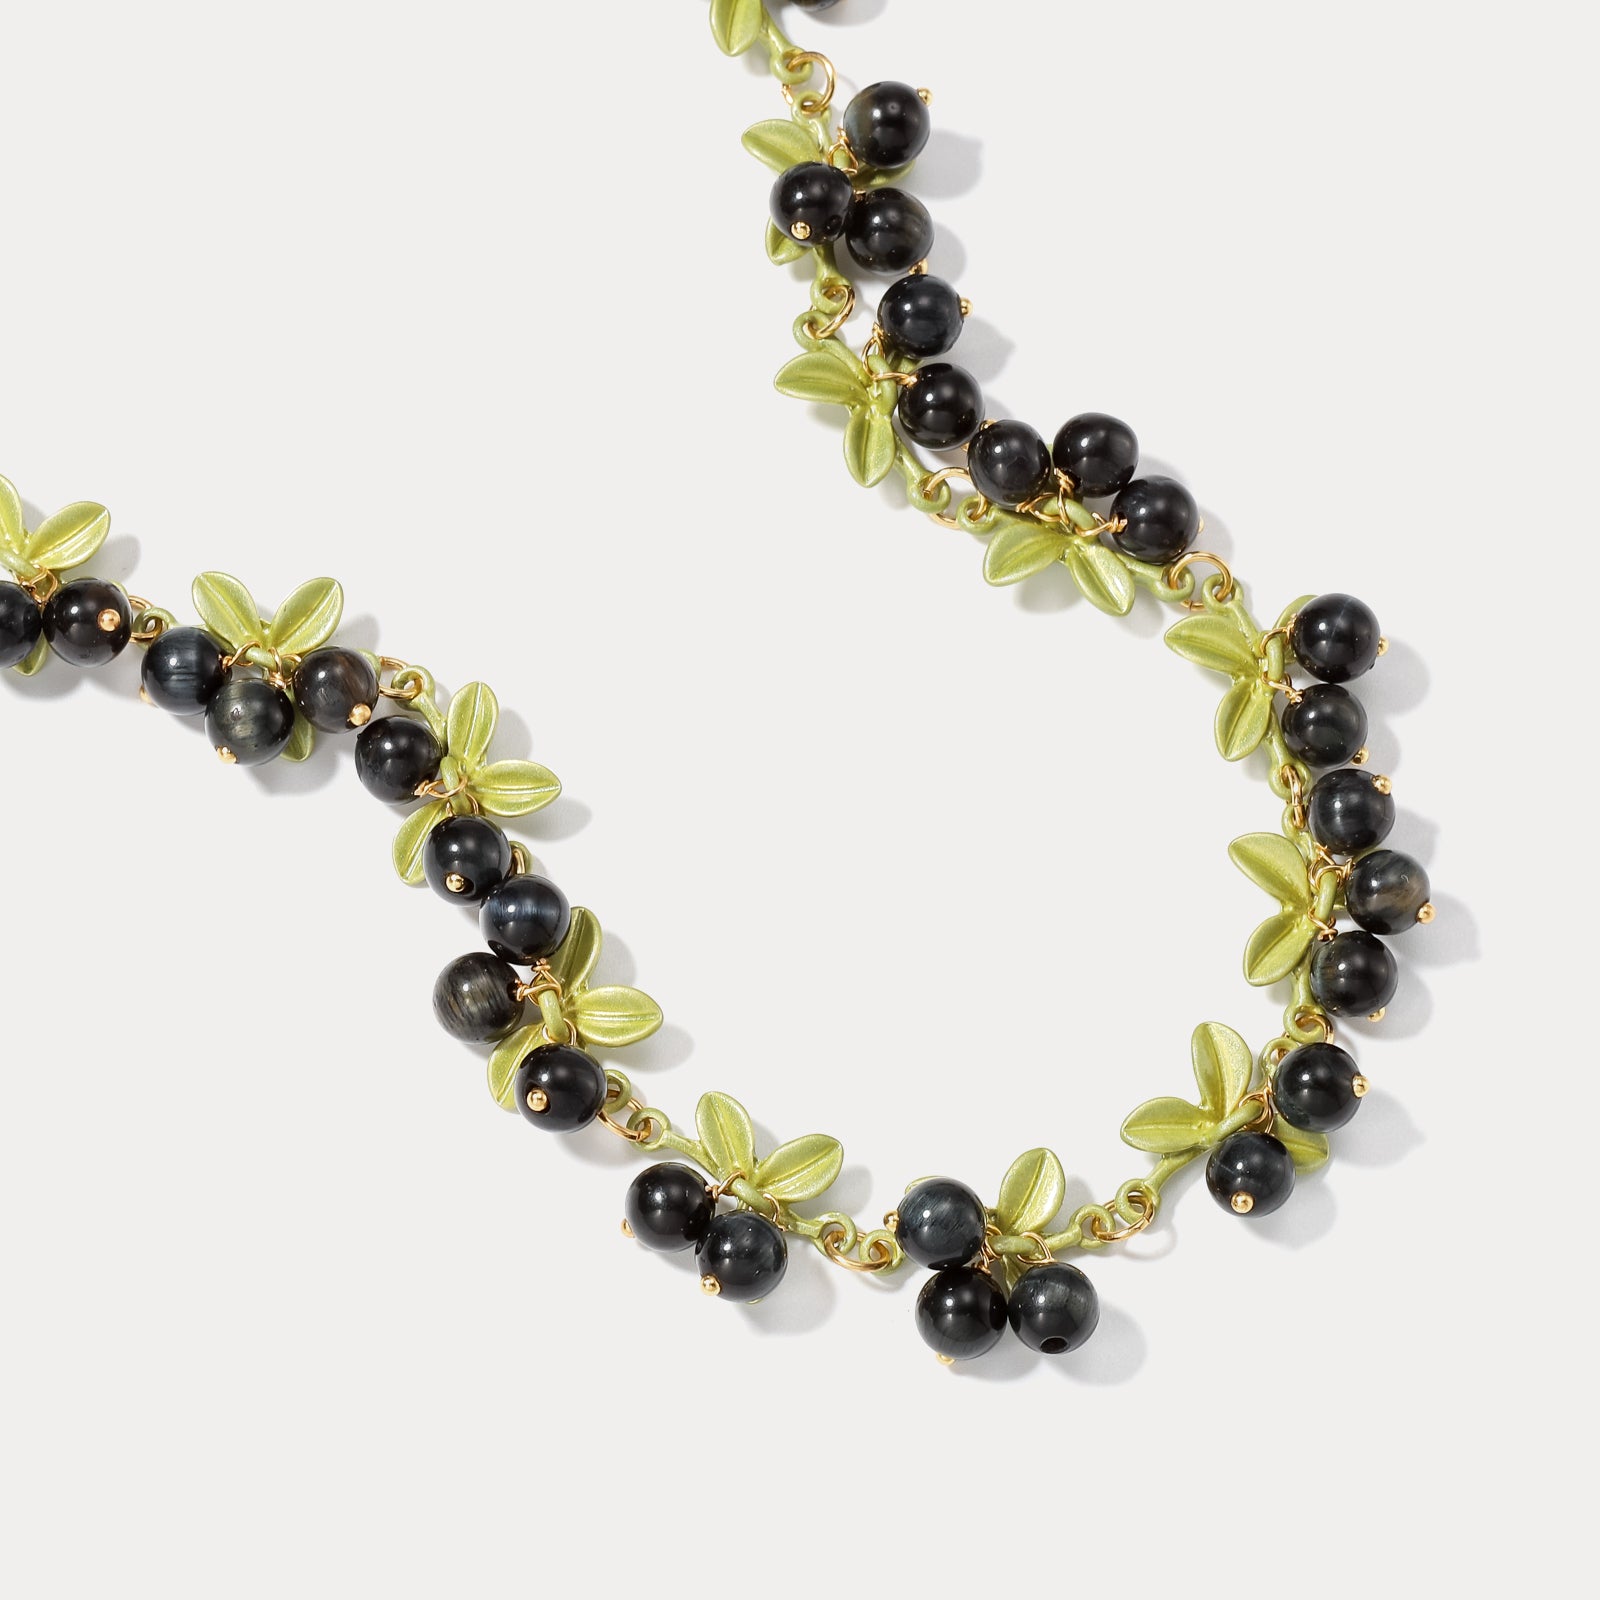 Black Currant Necklace Orchard Jewelry